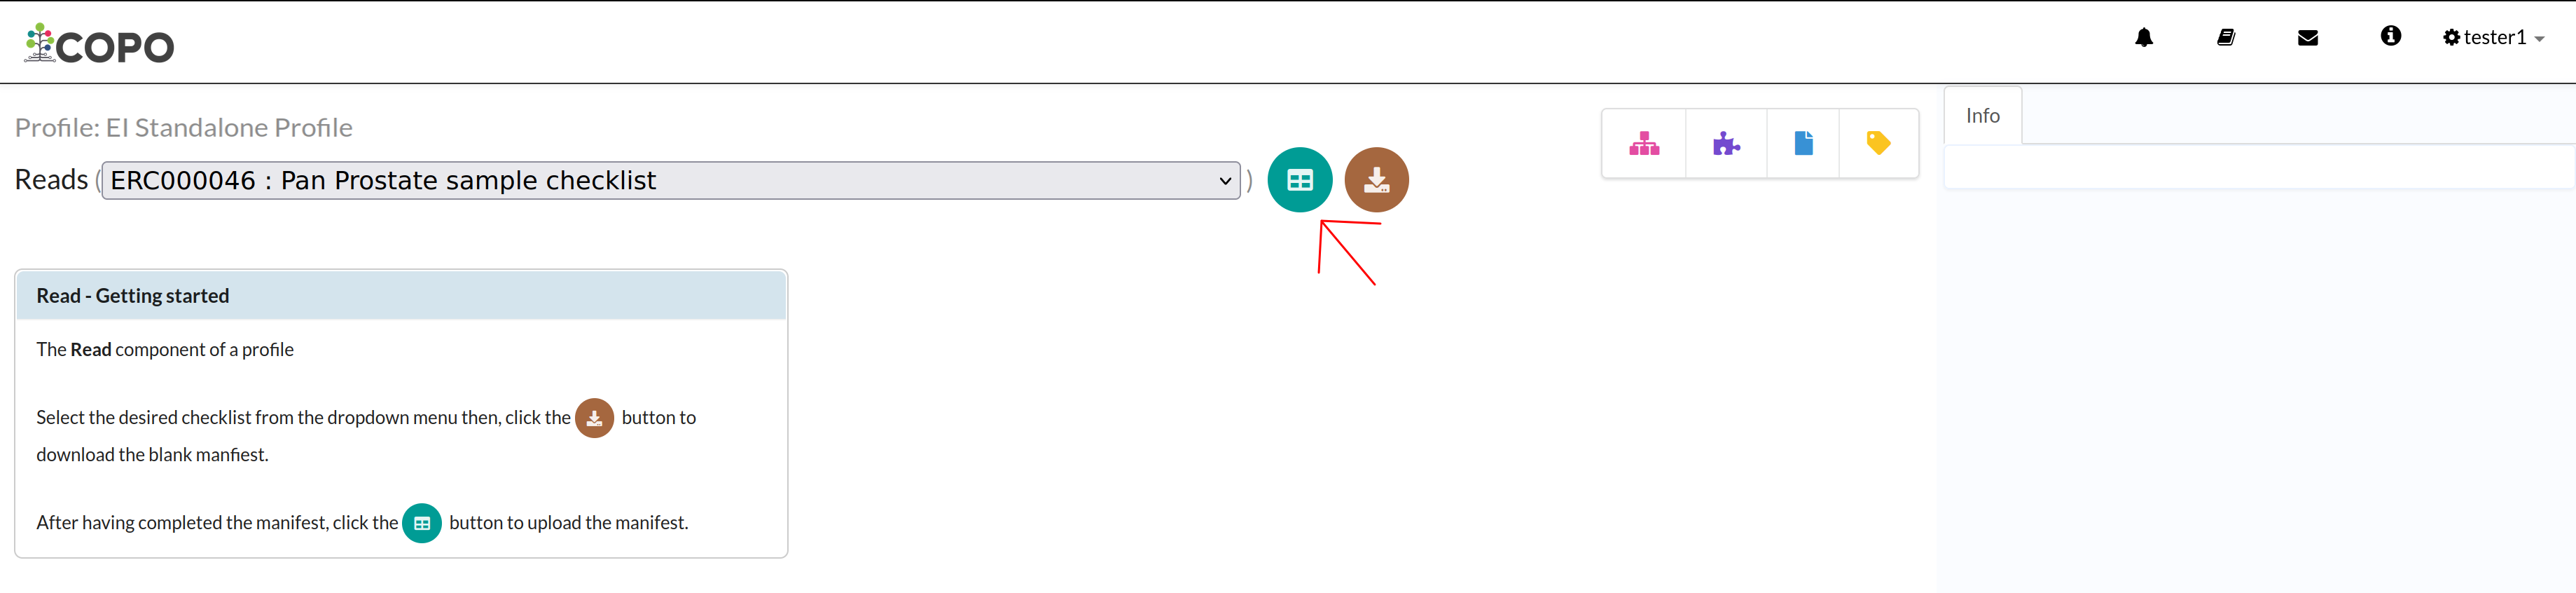 Pointer to 'Add Reads' from Spreadsheet' button